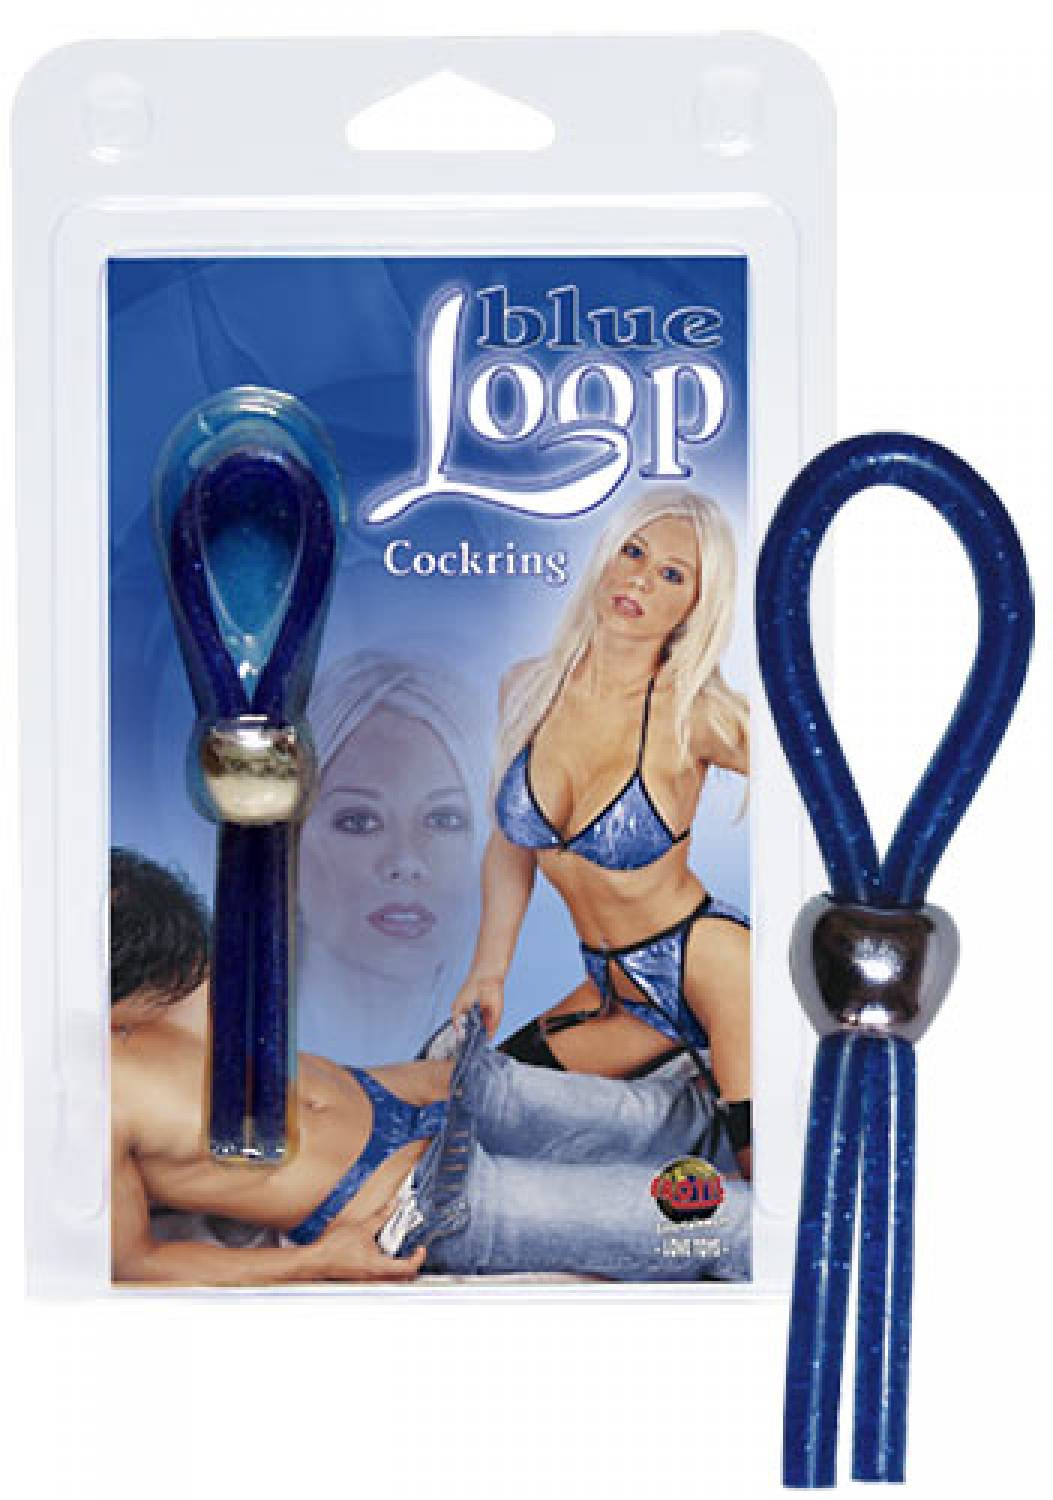 Erotic Entertainment Love Toys Cockring - Blue Loop